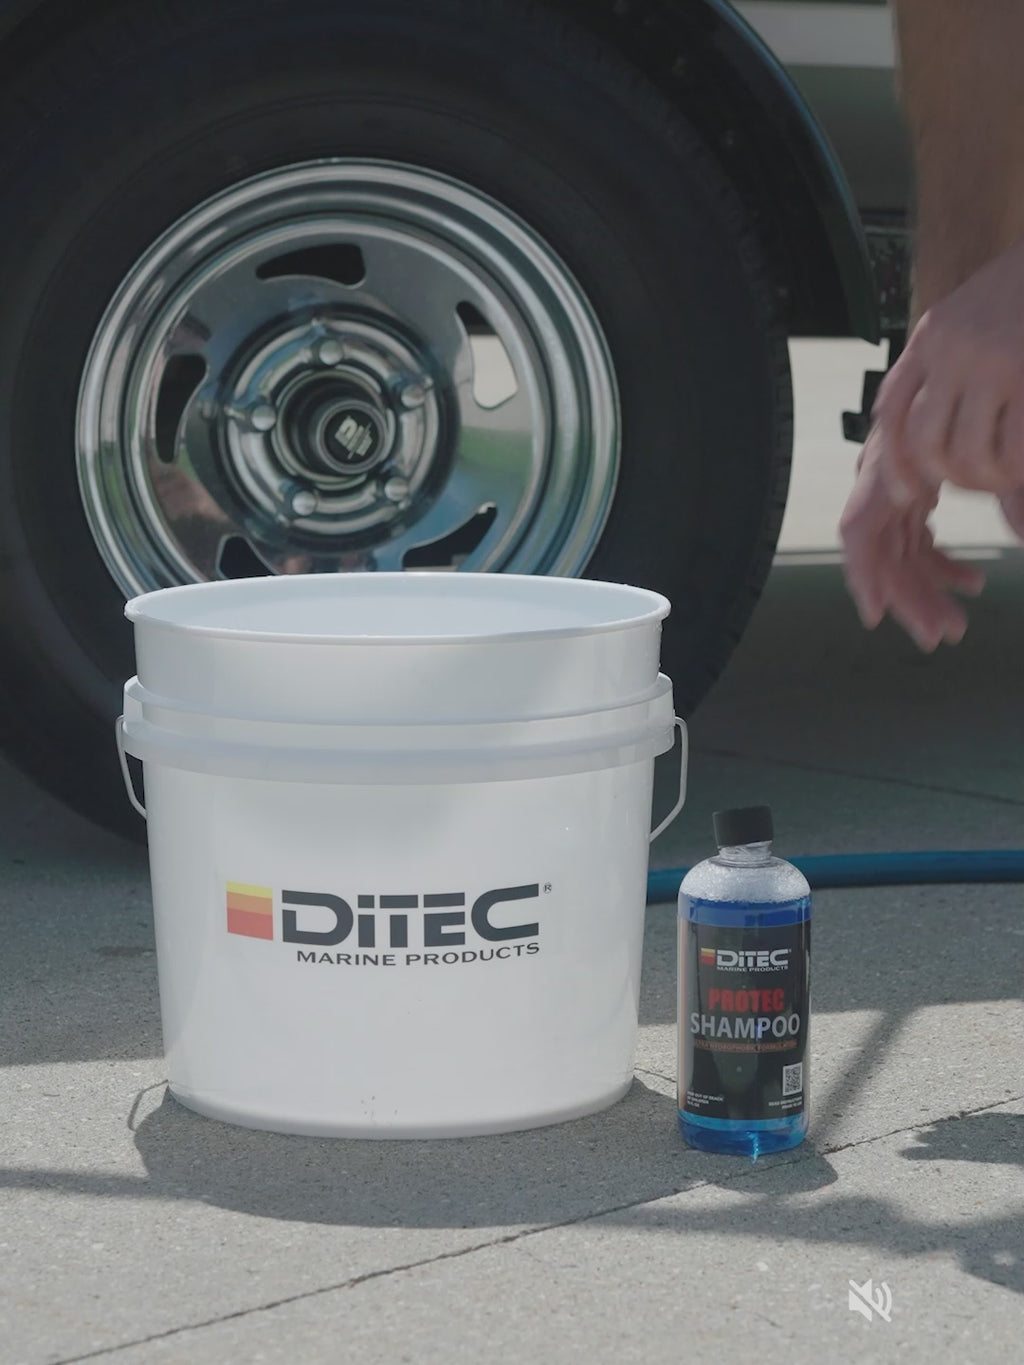 man using protec shampoo paint and gelcoat wash for boats from ditec